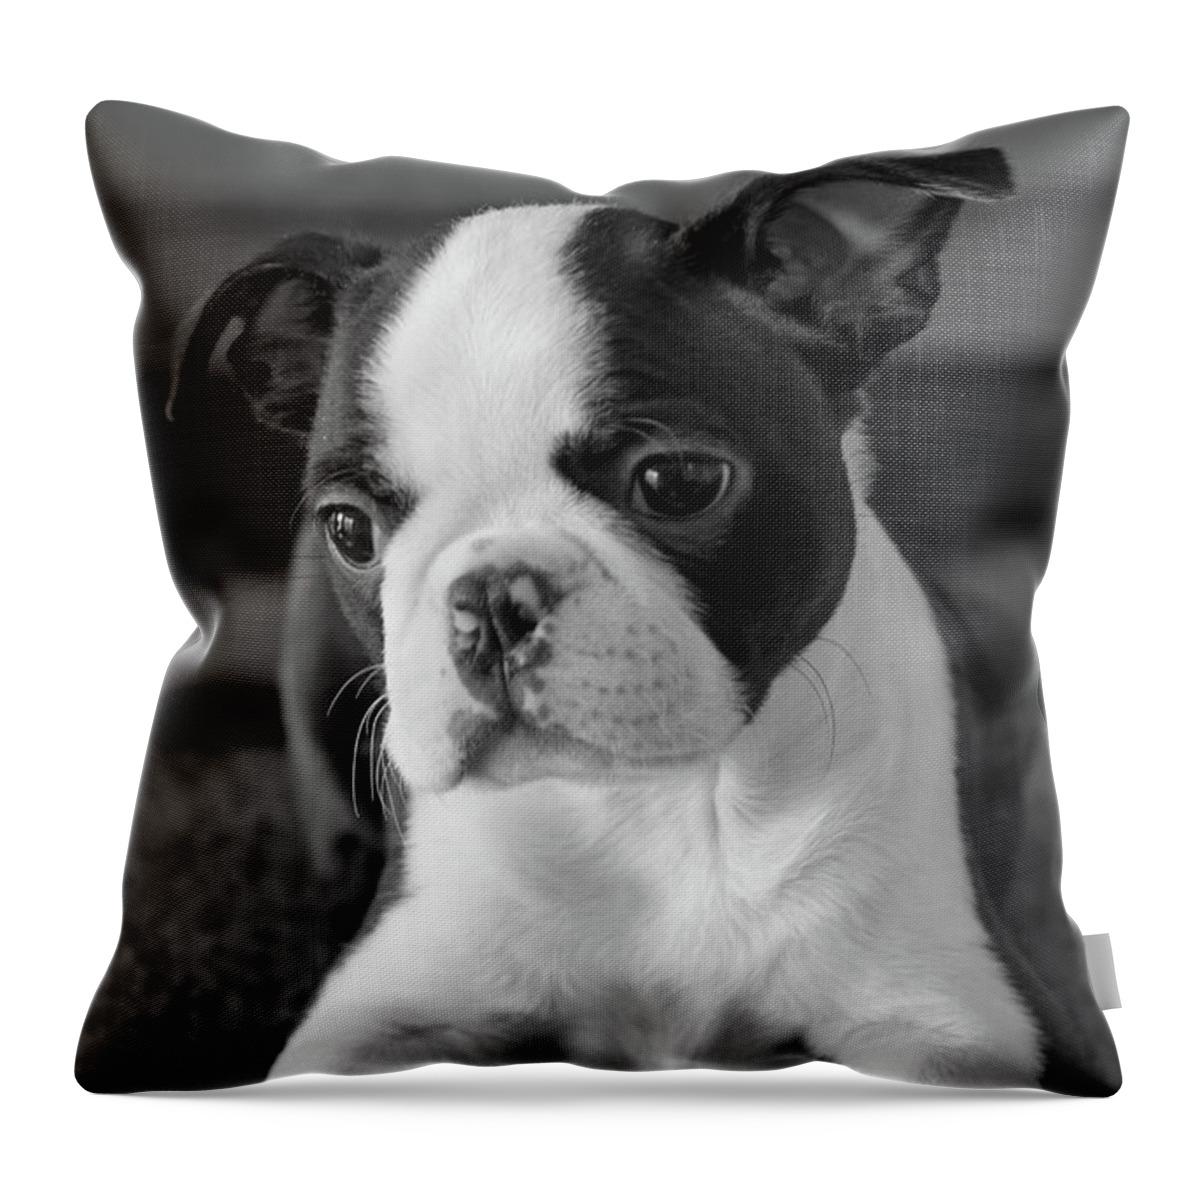 Puppy Throw Pillow featuring the photograph Thinking of You by Alana Thrower